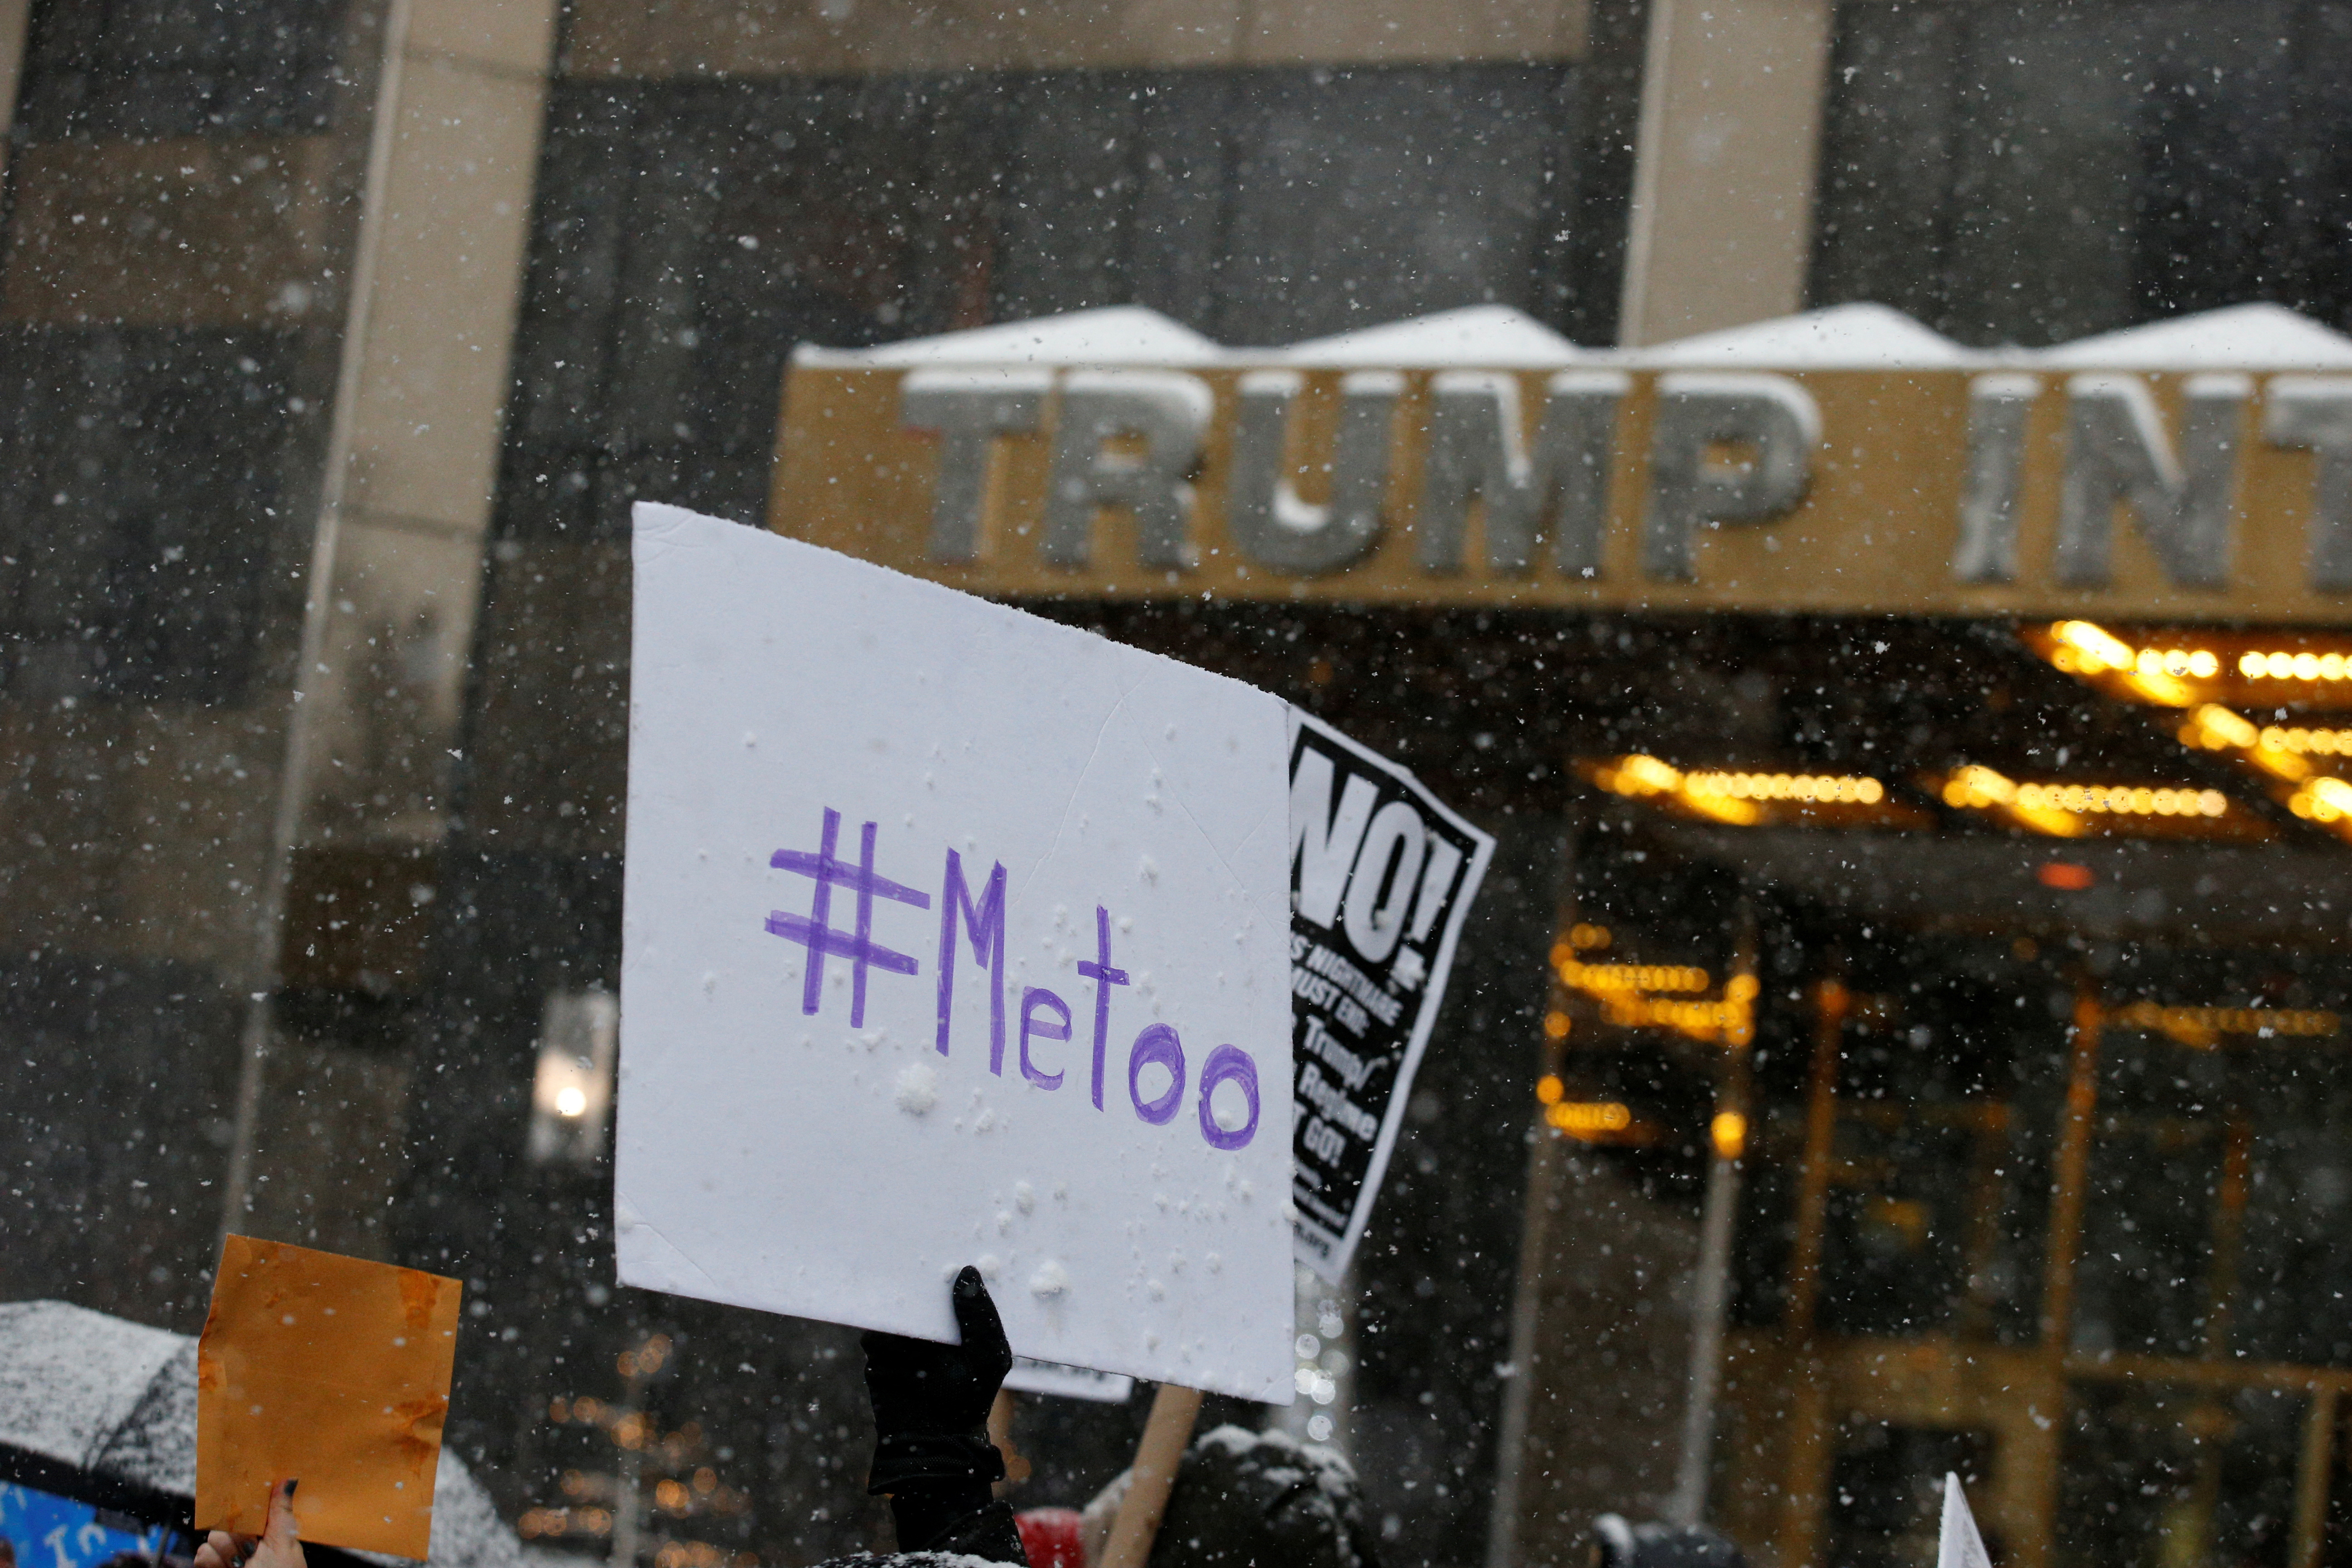 Protest signs are raised at #MeToo demonstration outside Trump International hotel in New York